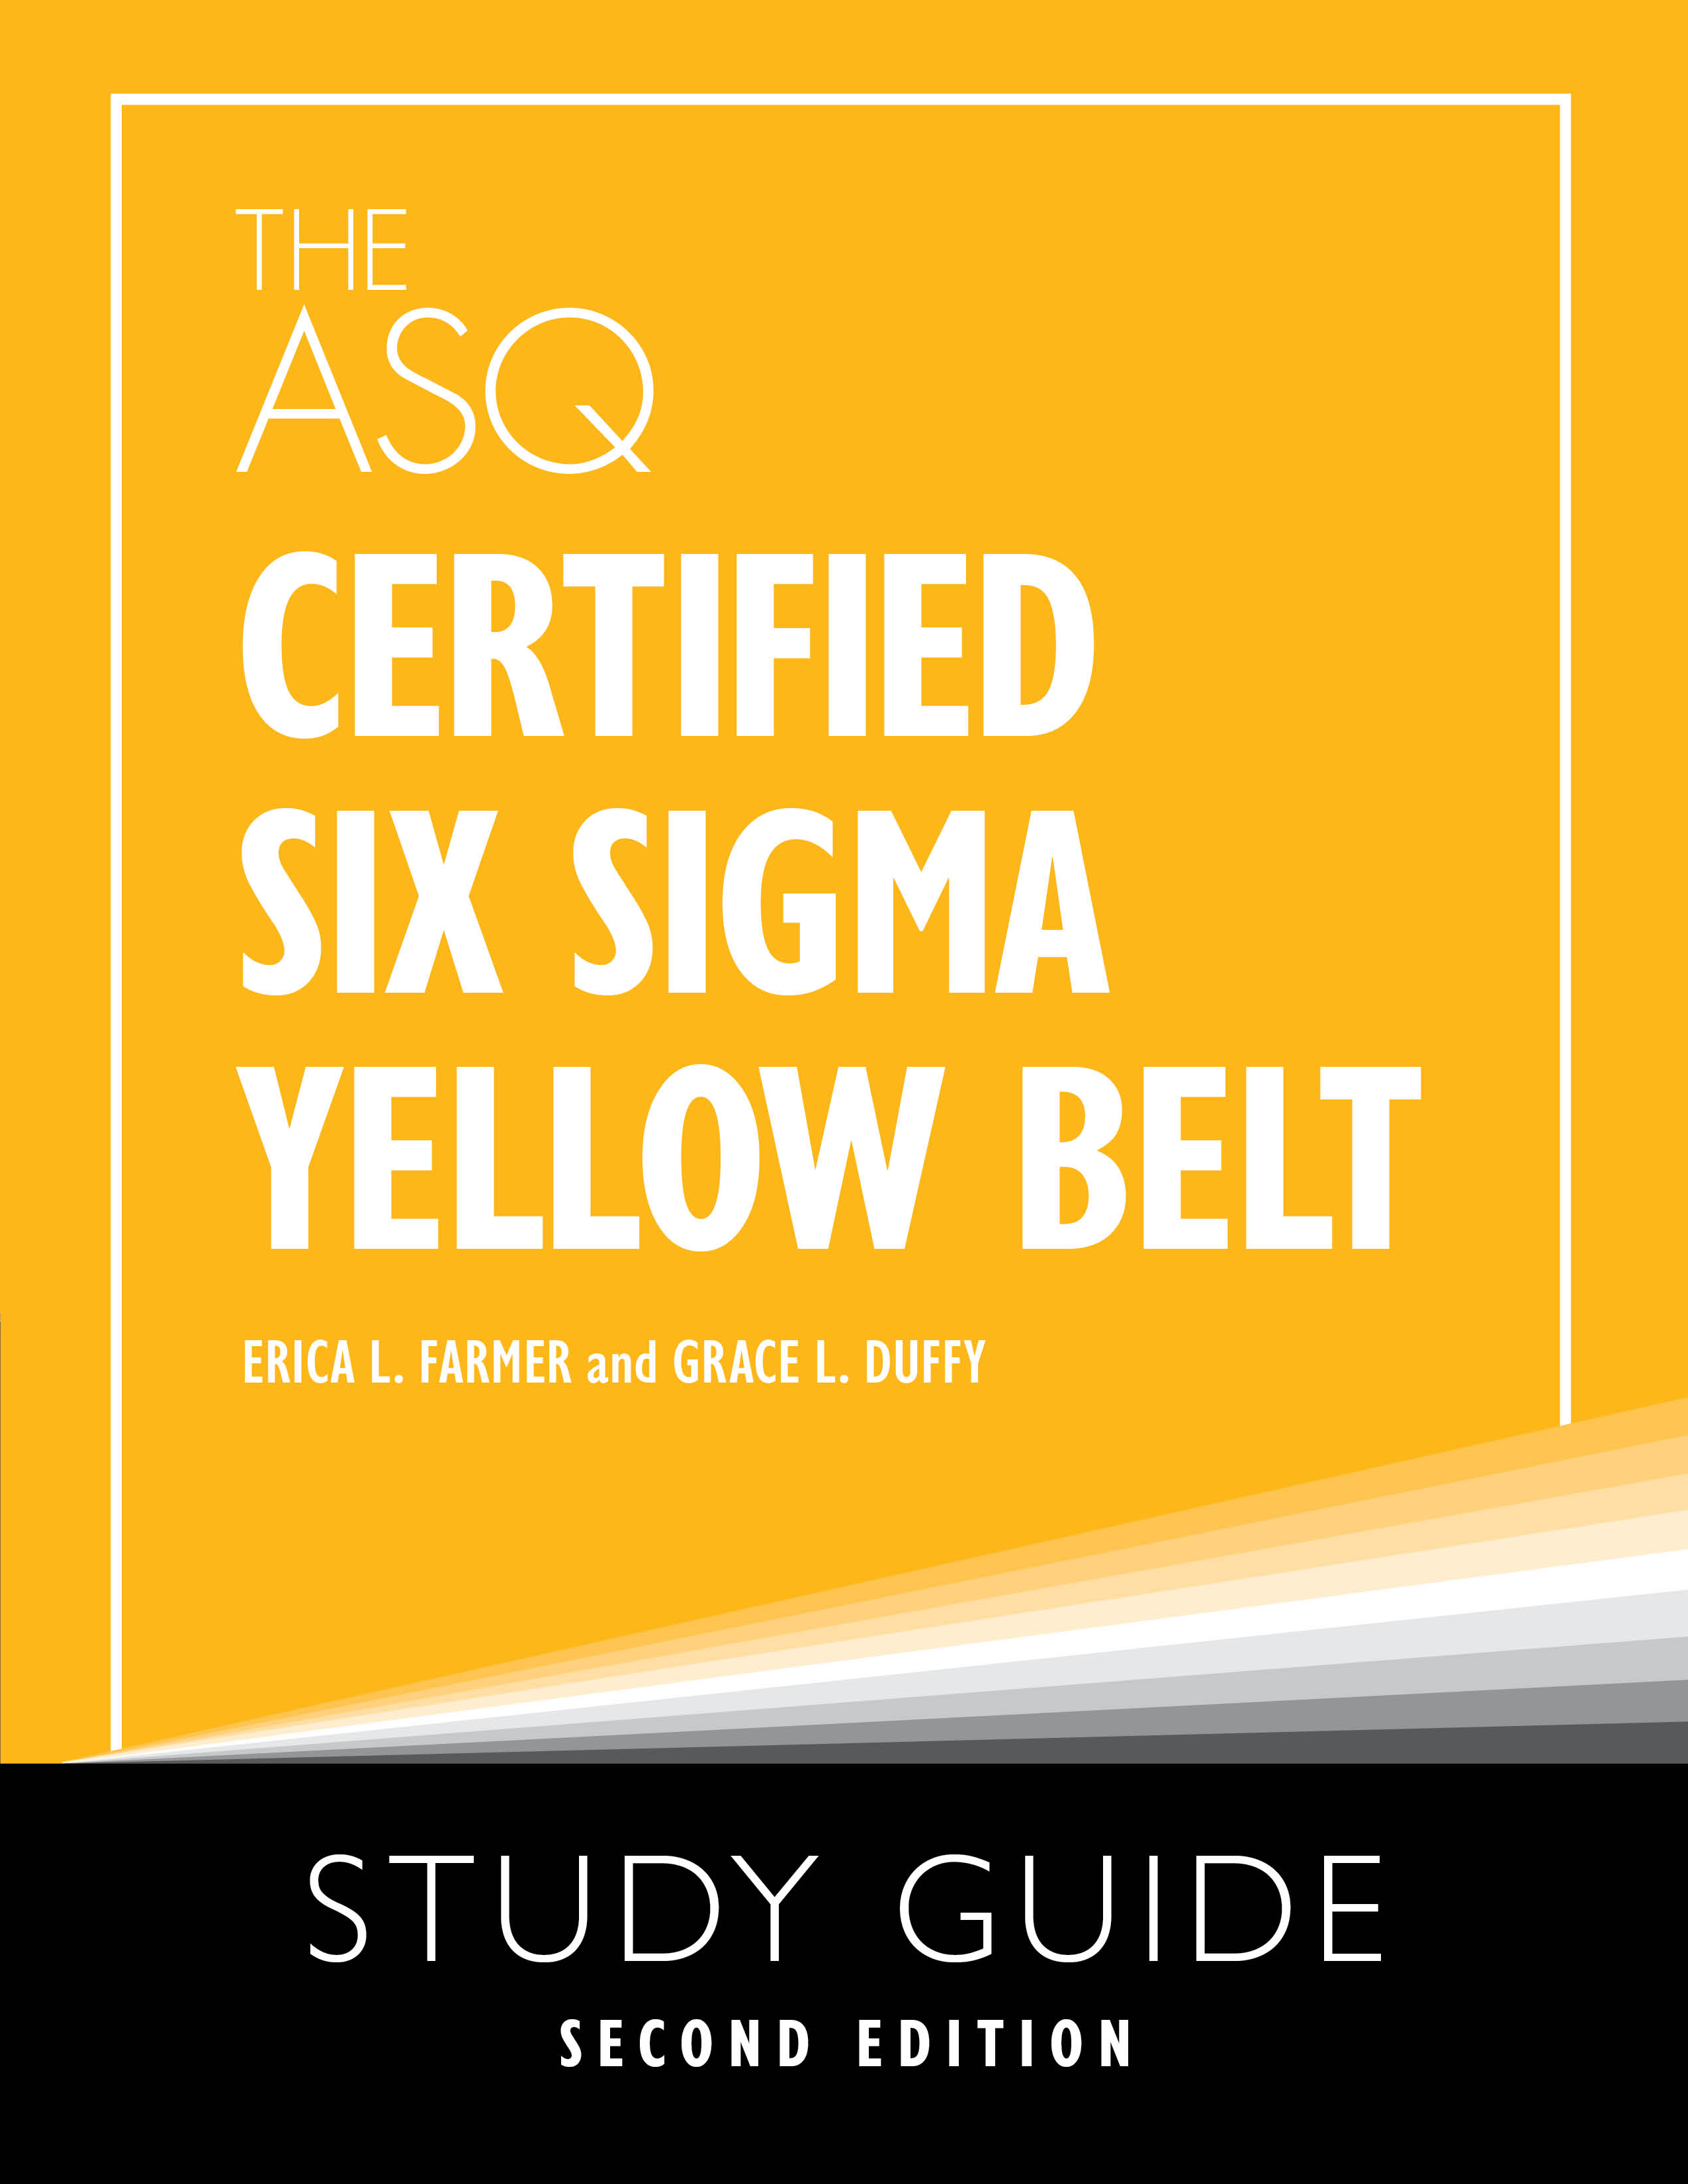 The ASQ Certified Six Sigma Yellow Belt Study Guide, Second Edition